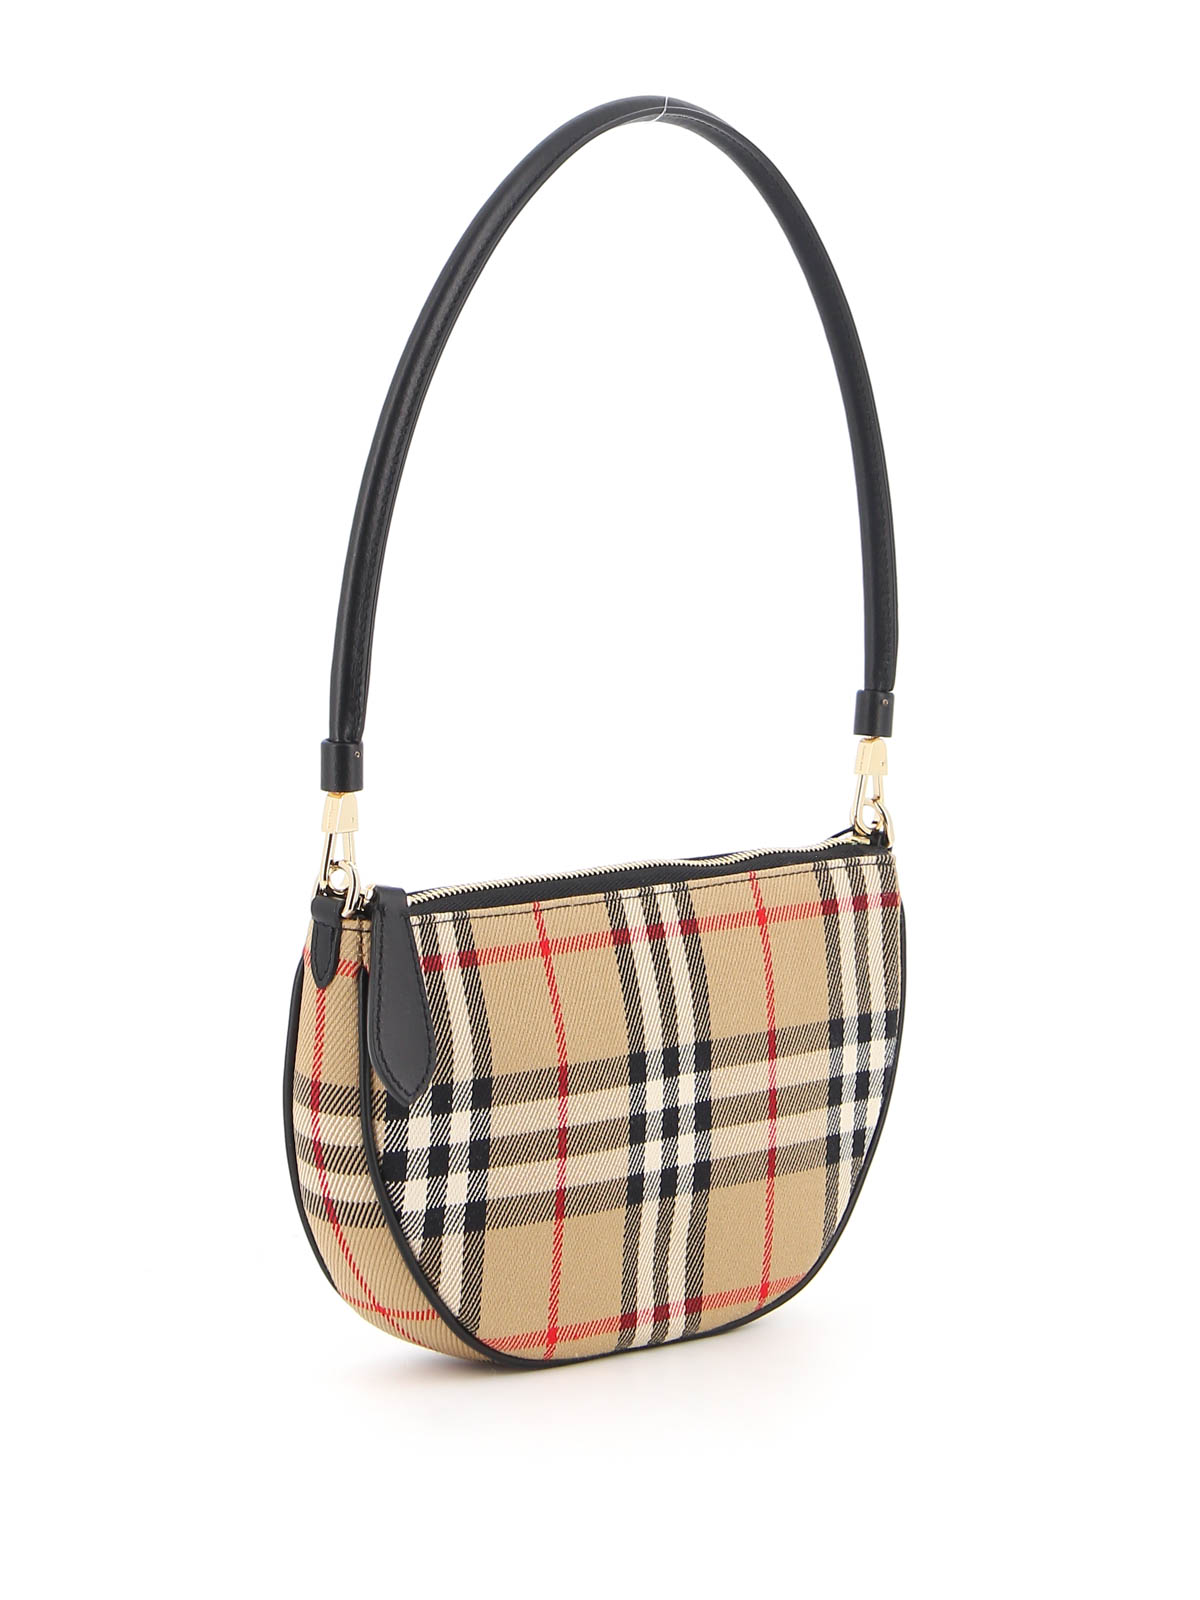 Cross body bags Burberry - Olympia bag - 8036728 | Shop online at iKRIX